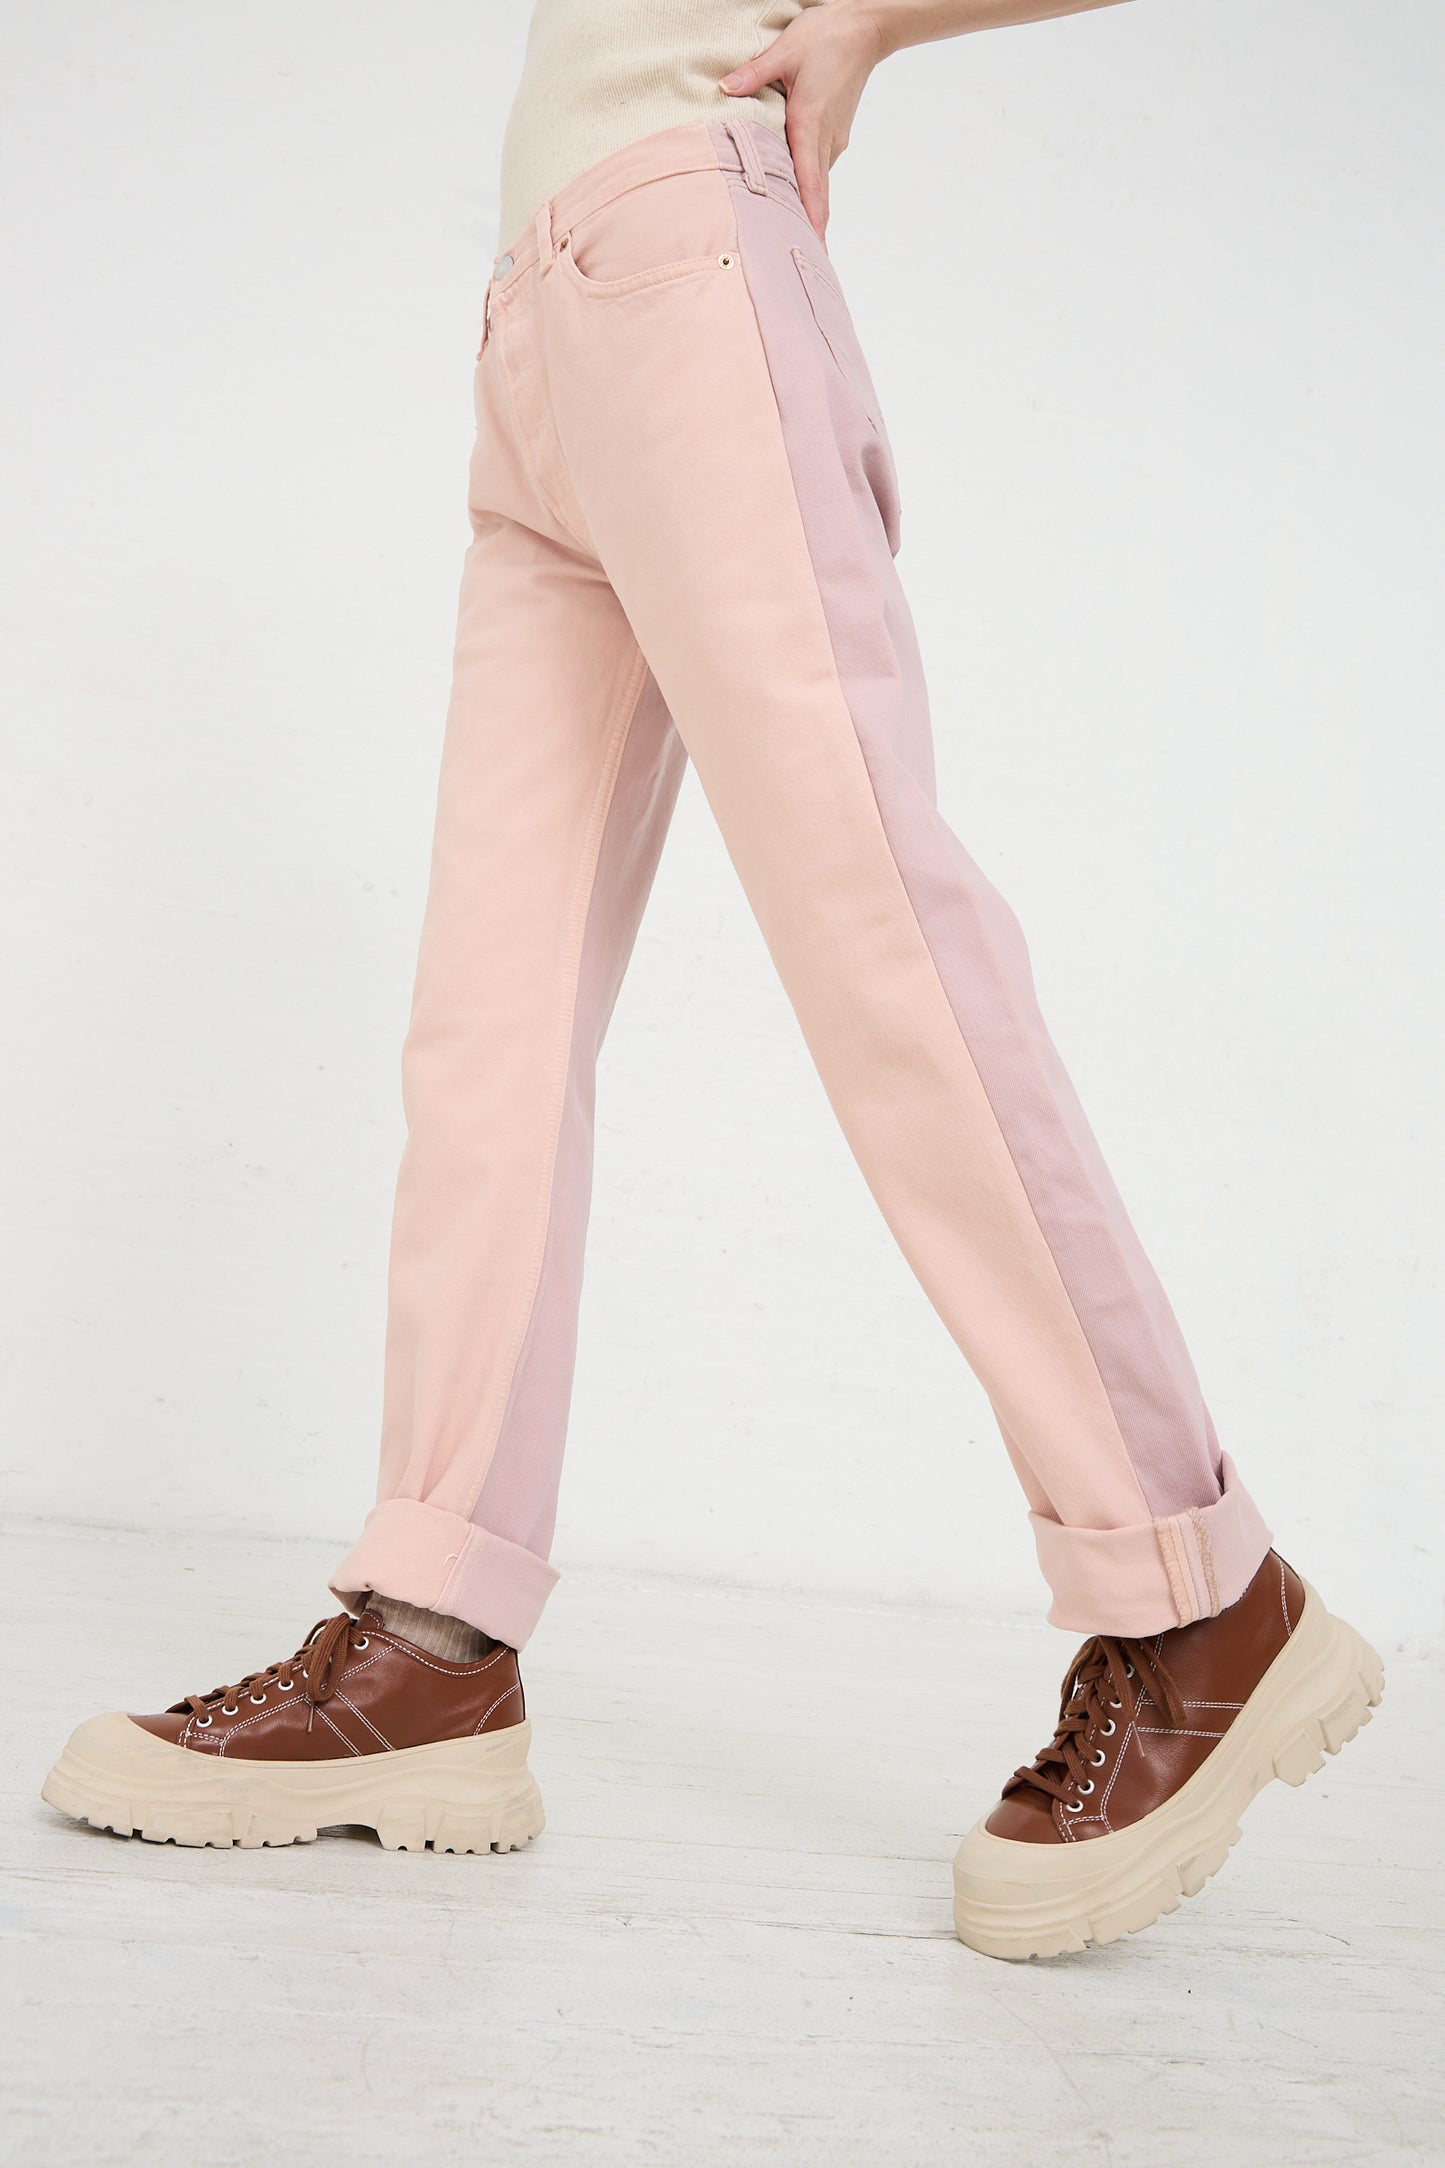 A person walking wearing Bless No. 73 Jeanspleatfront in Pink/Purple and brown shoes with thick soles.